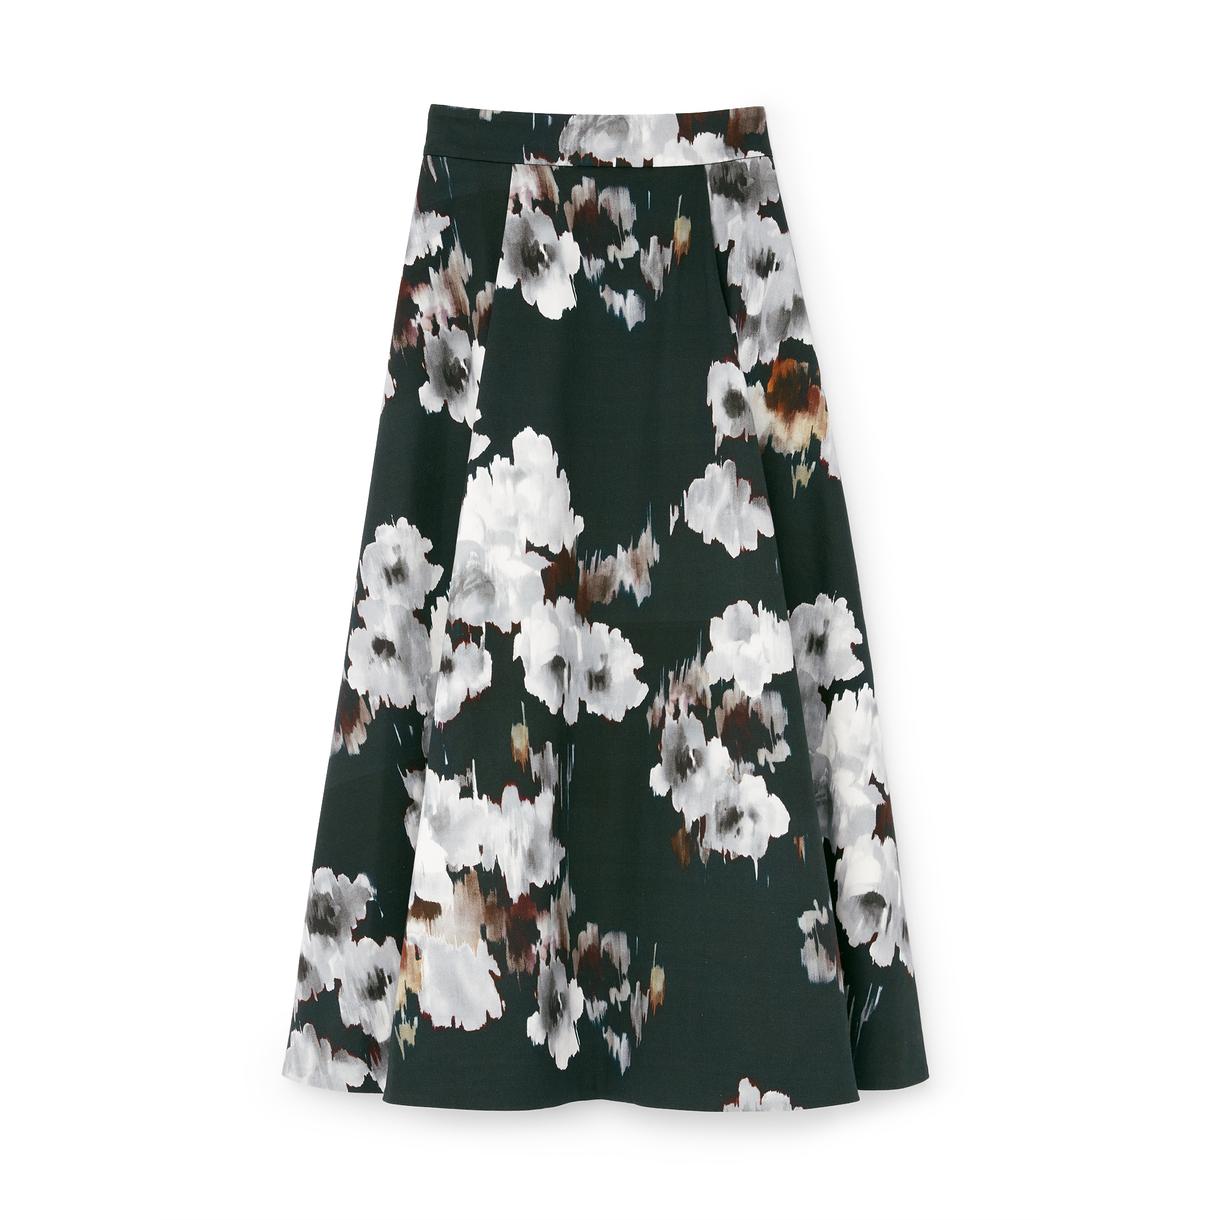 G. Label by goop Rigby Circle Skirt